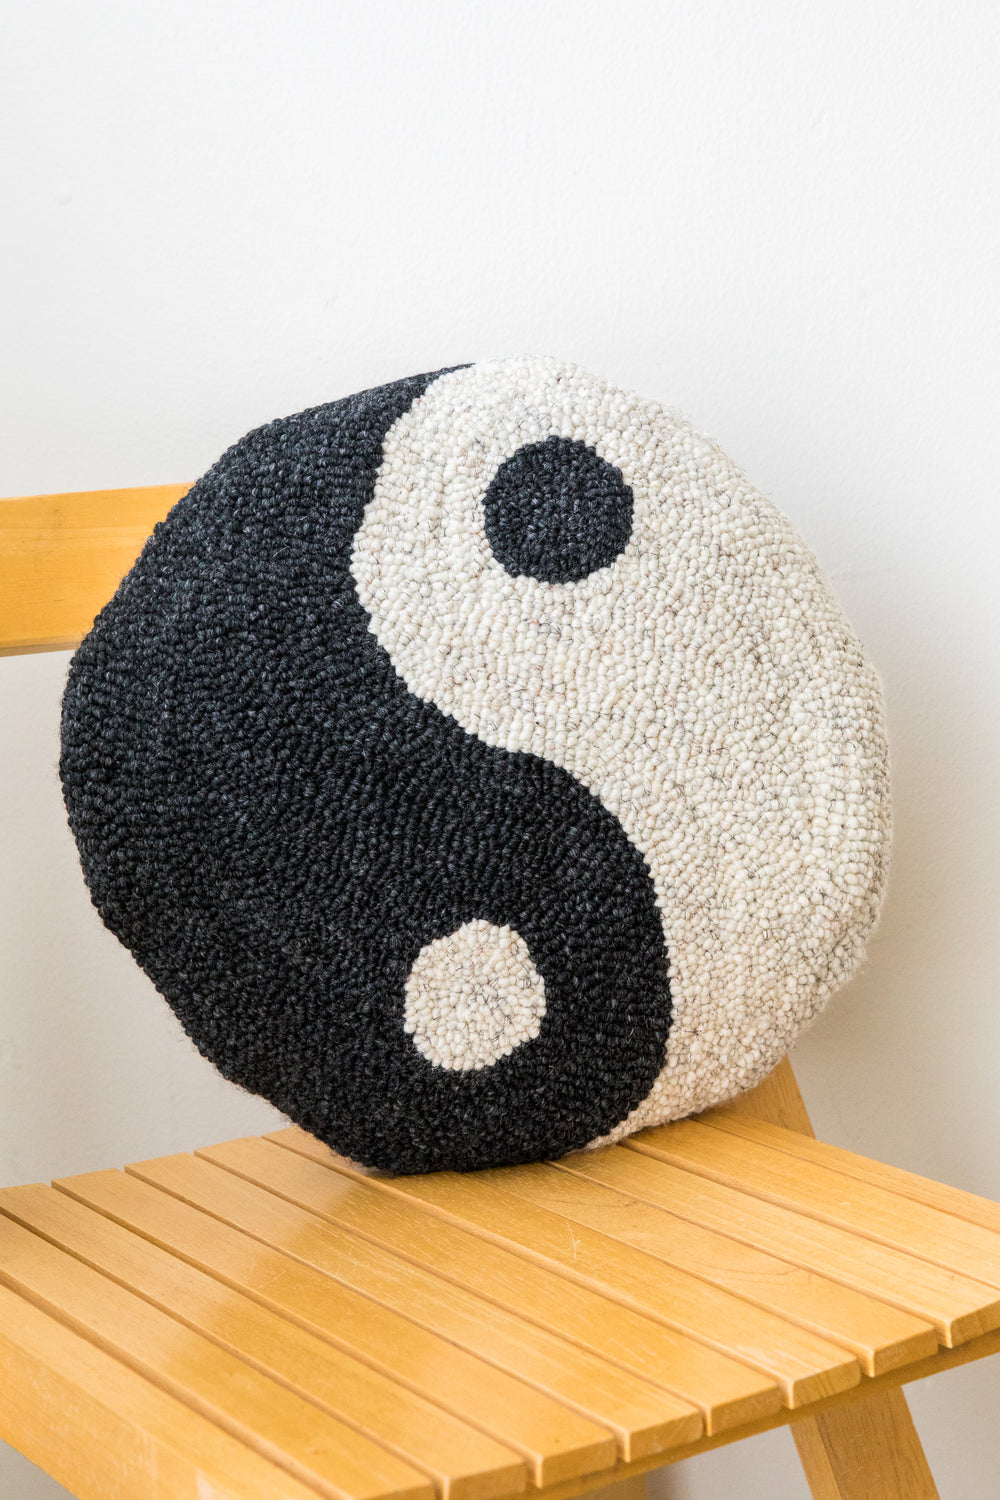 X PRISM Charcoal Speckled Yin Yang Pillow